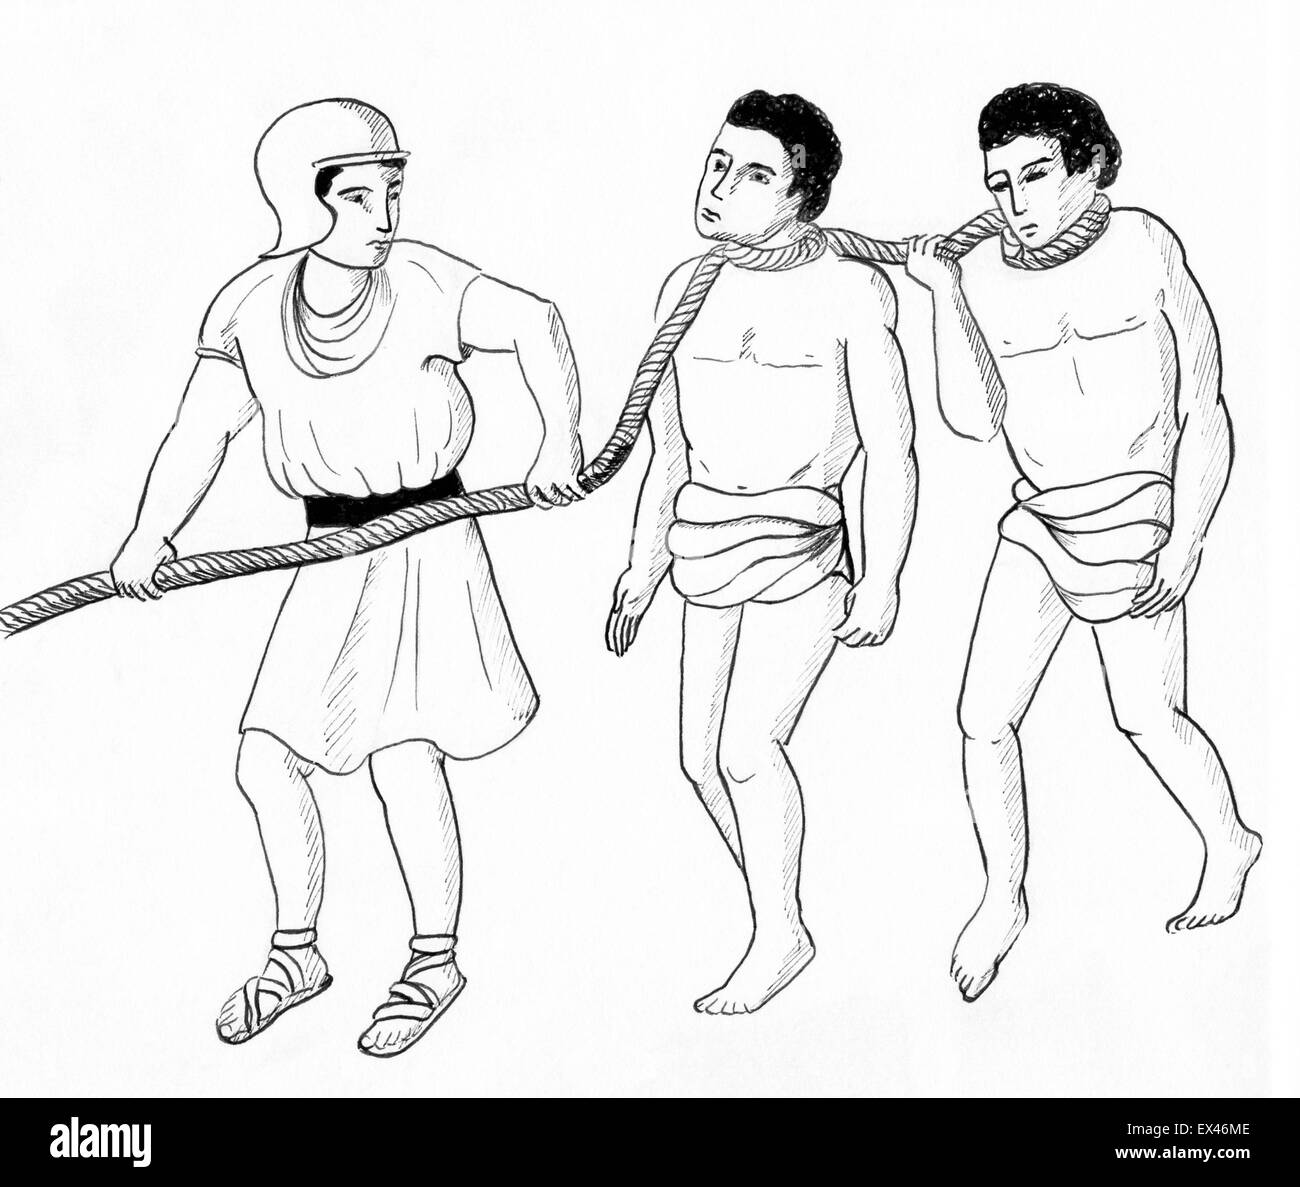 Line drawing of Roman or Greek slaves being led to market. Stock Photo